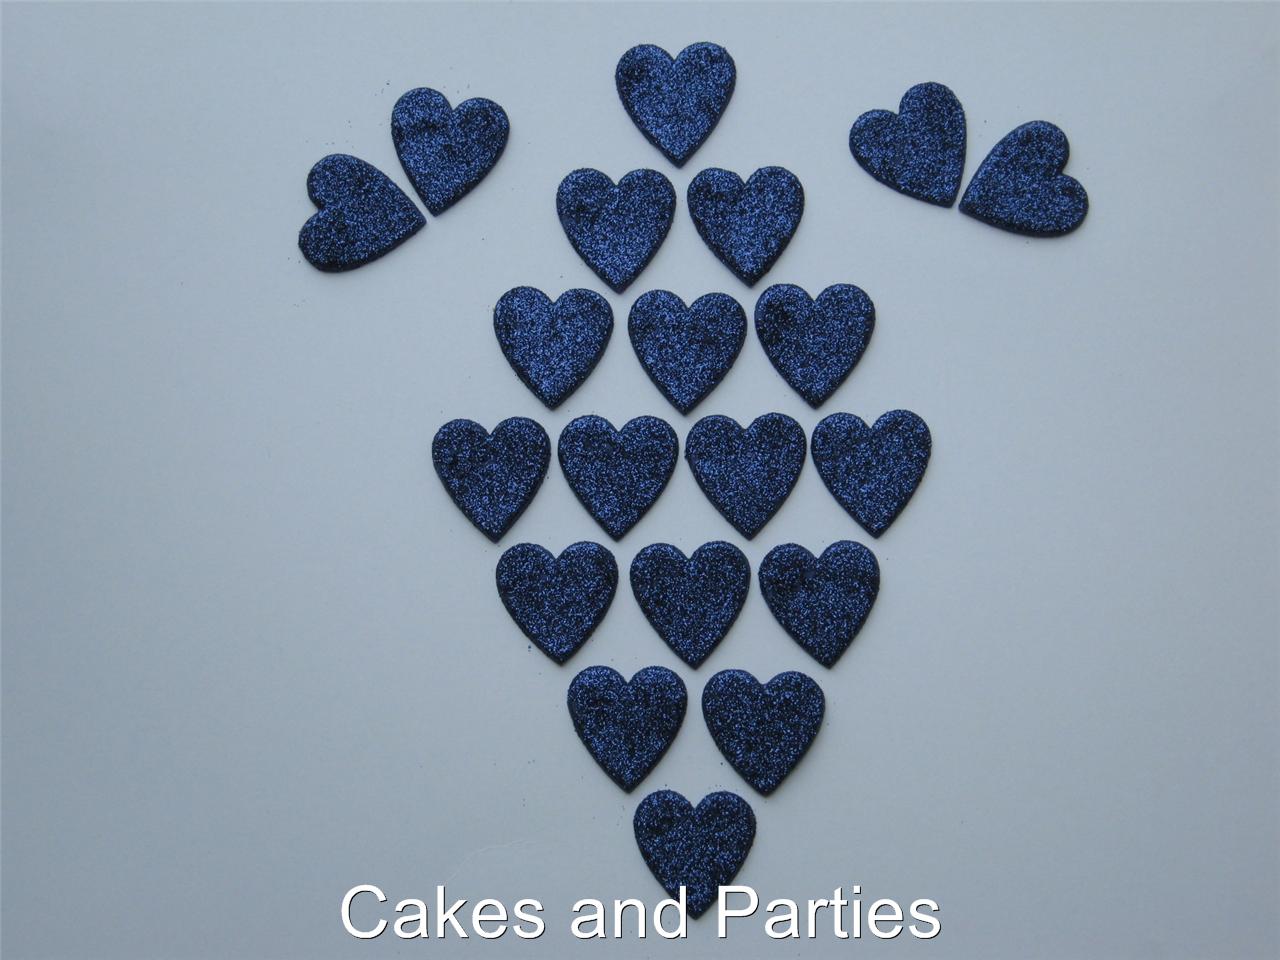 20 X EDIBLE GLITTER STARS. CAKE DECORATIONS - VARIOUS COLOURS - SMALL 2cm